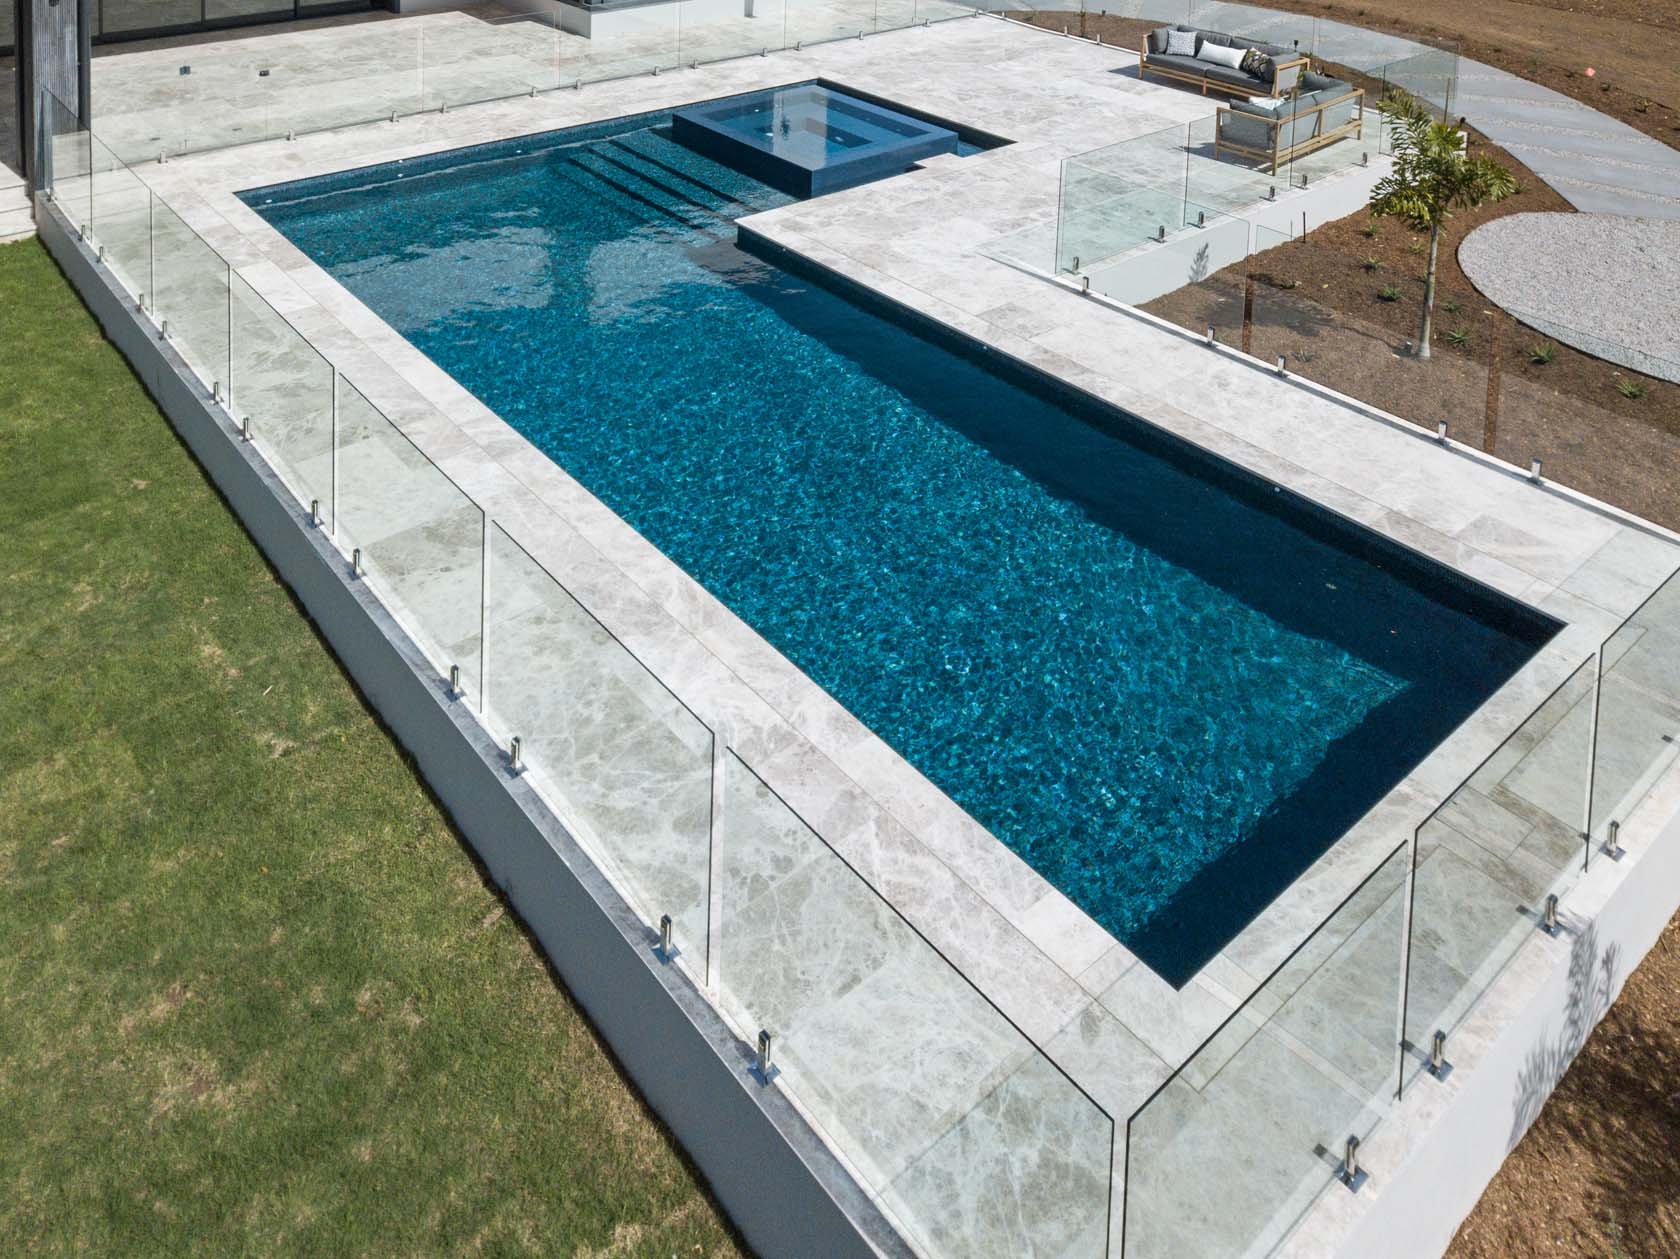 Silver Marble coping and surrounds with fully tiled pool in Peacock Glass